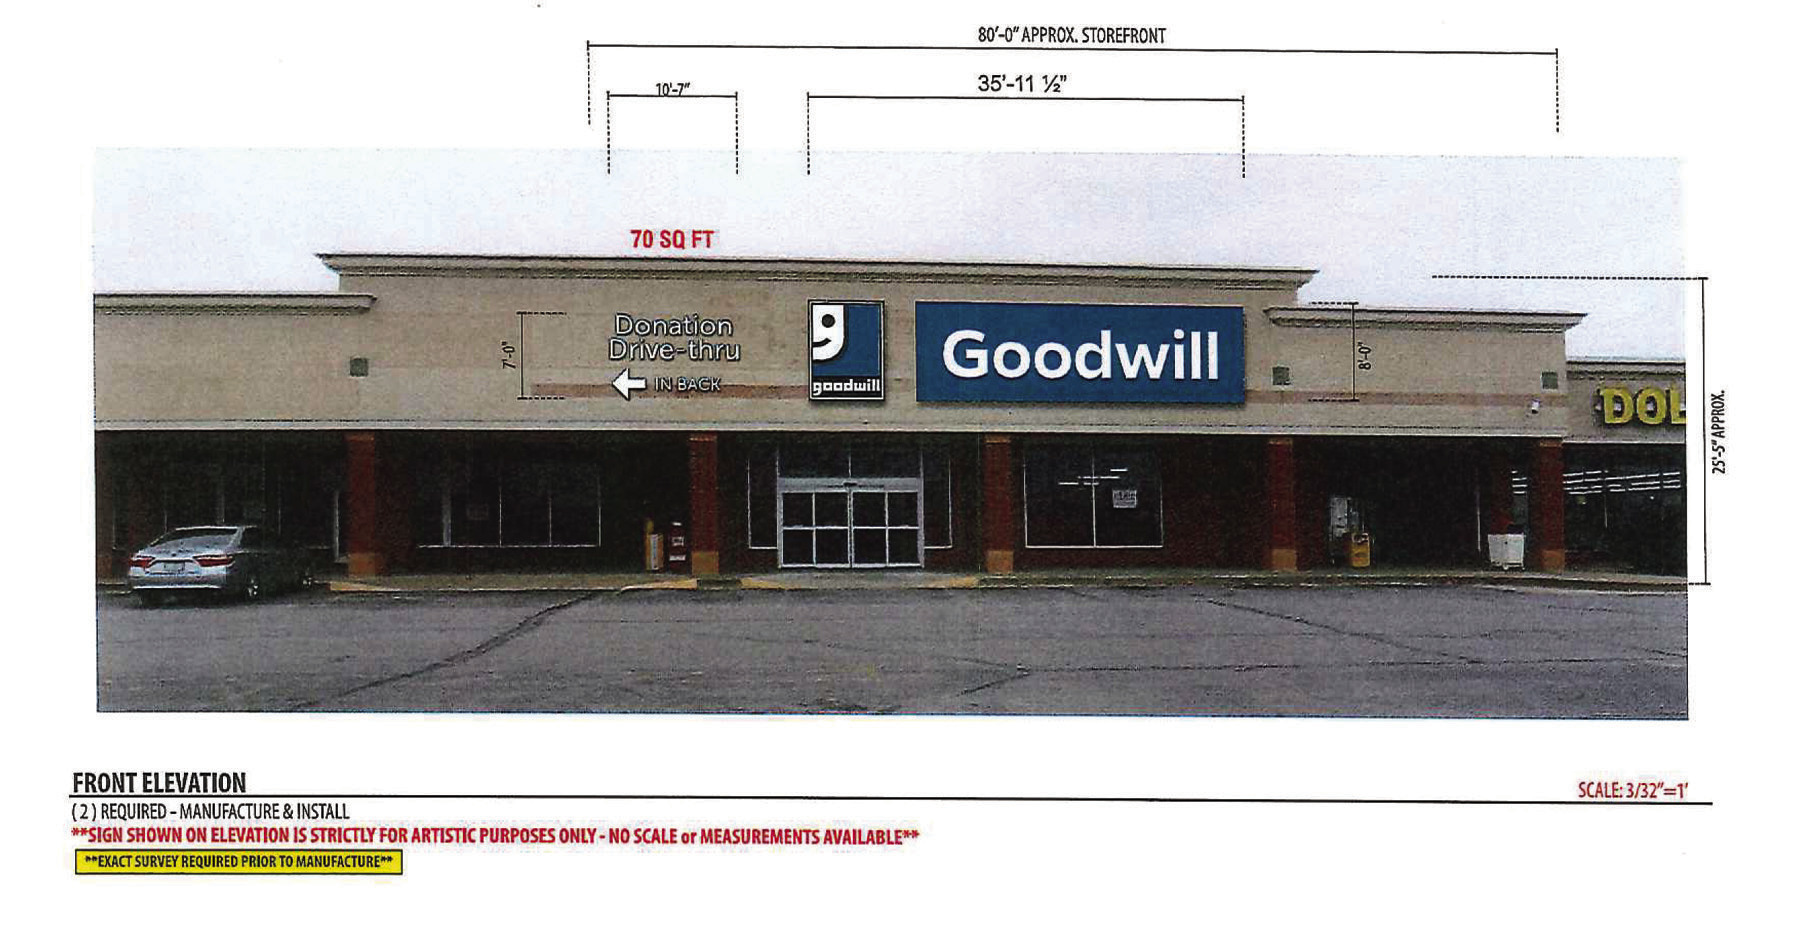 The schematic drawings above show the signs for the new Goodwill Industries store in the Weatherford Shopping Center.